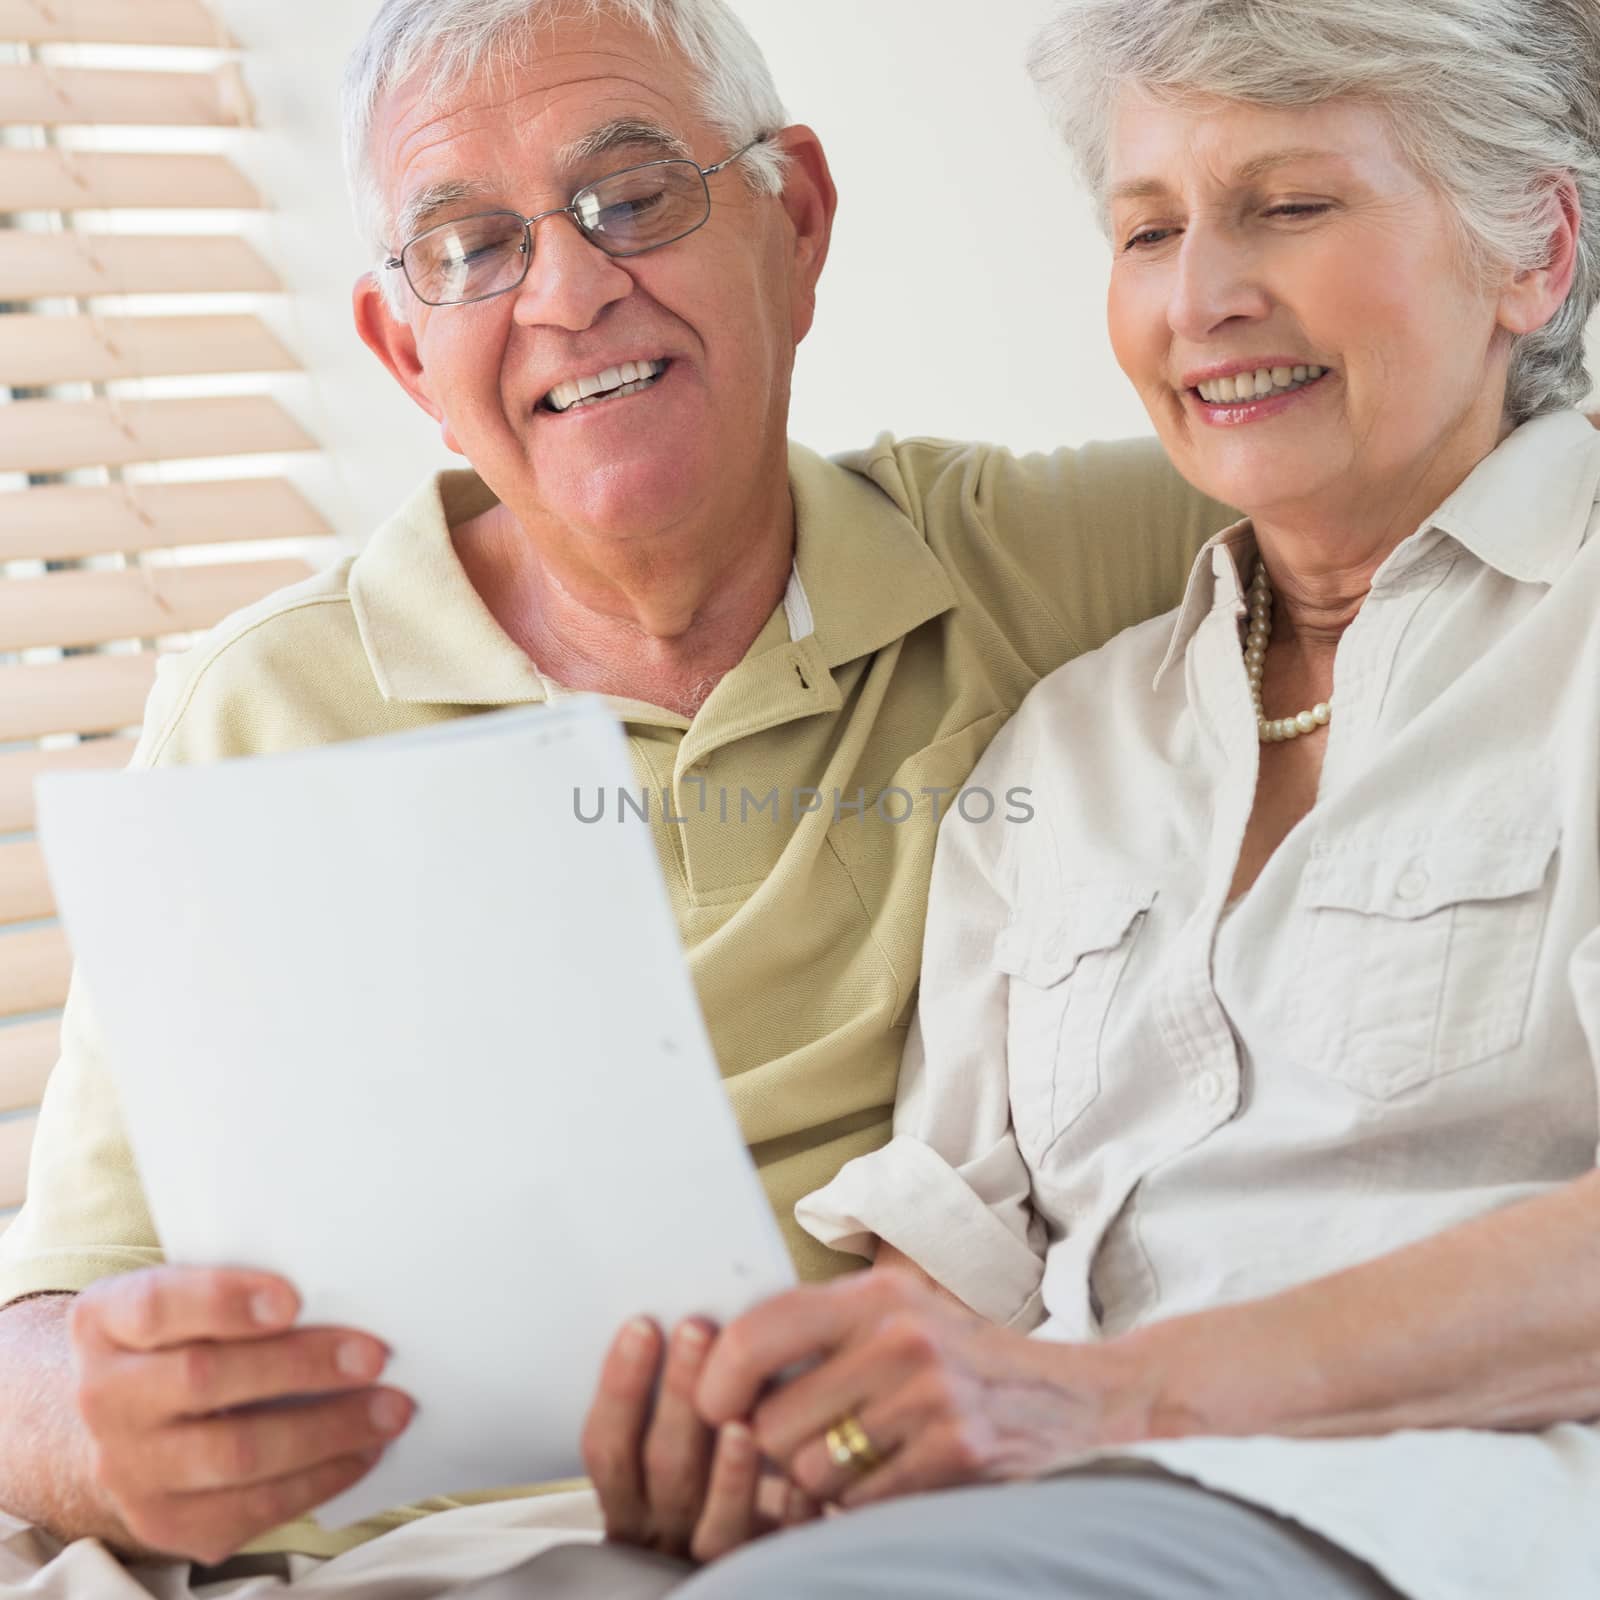 Senior couple looking at document together on the couch by Wavebreakmedia